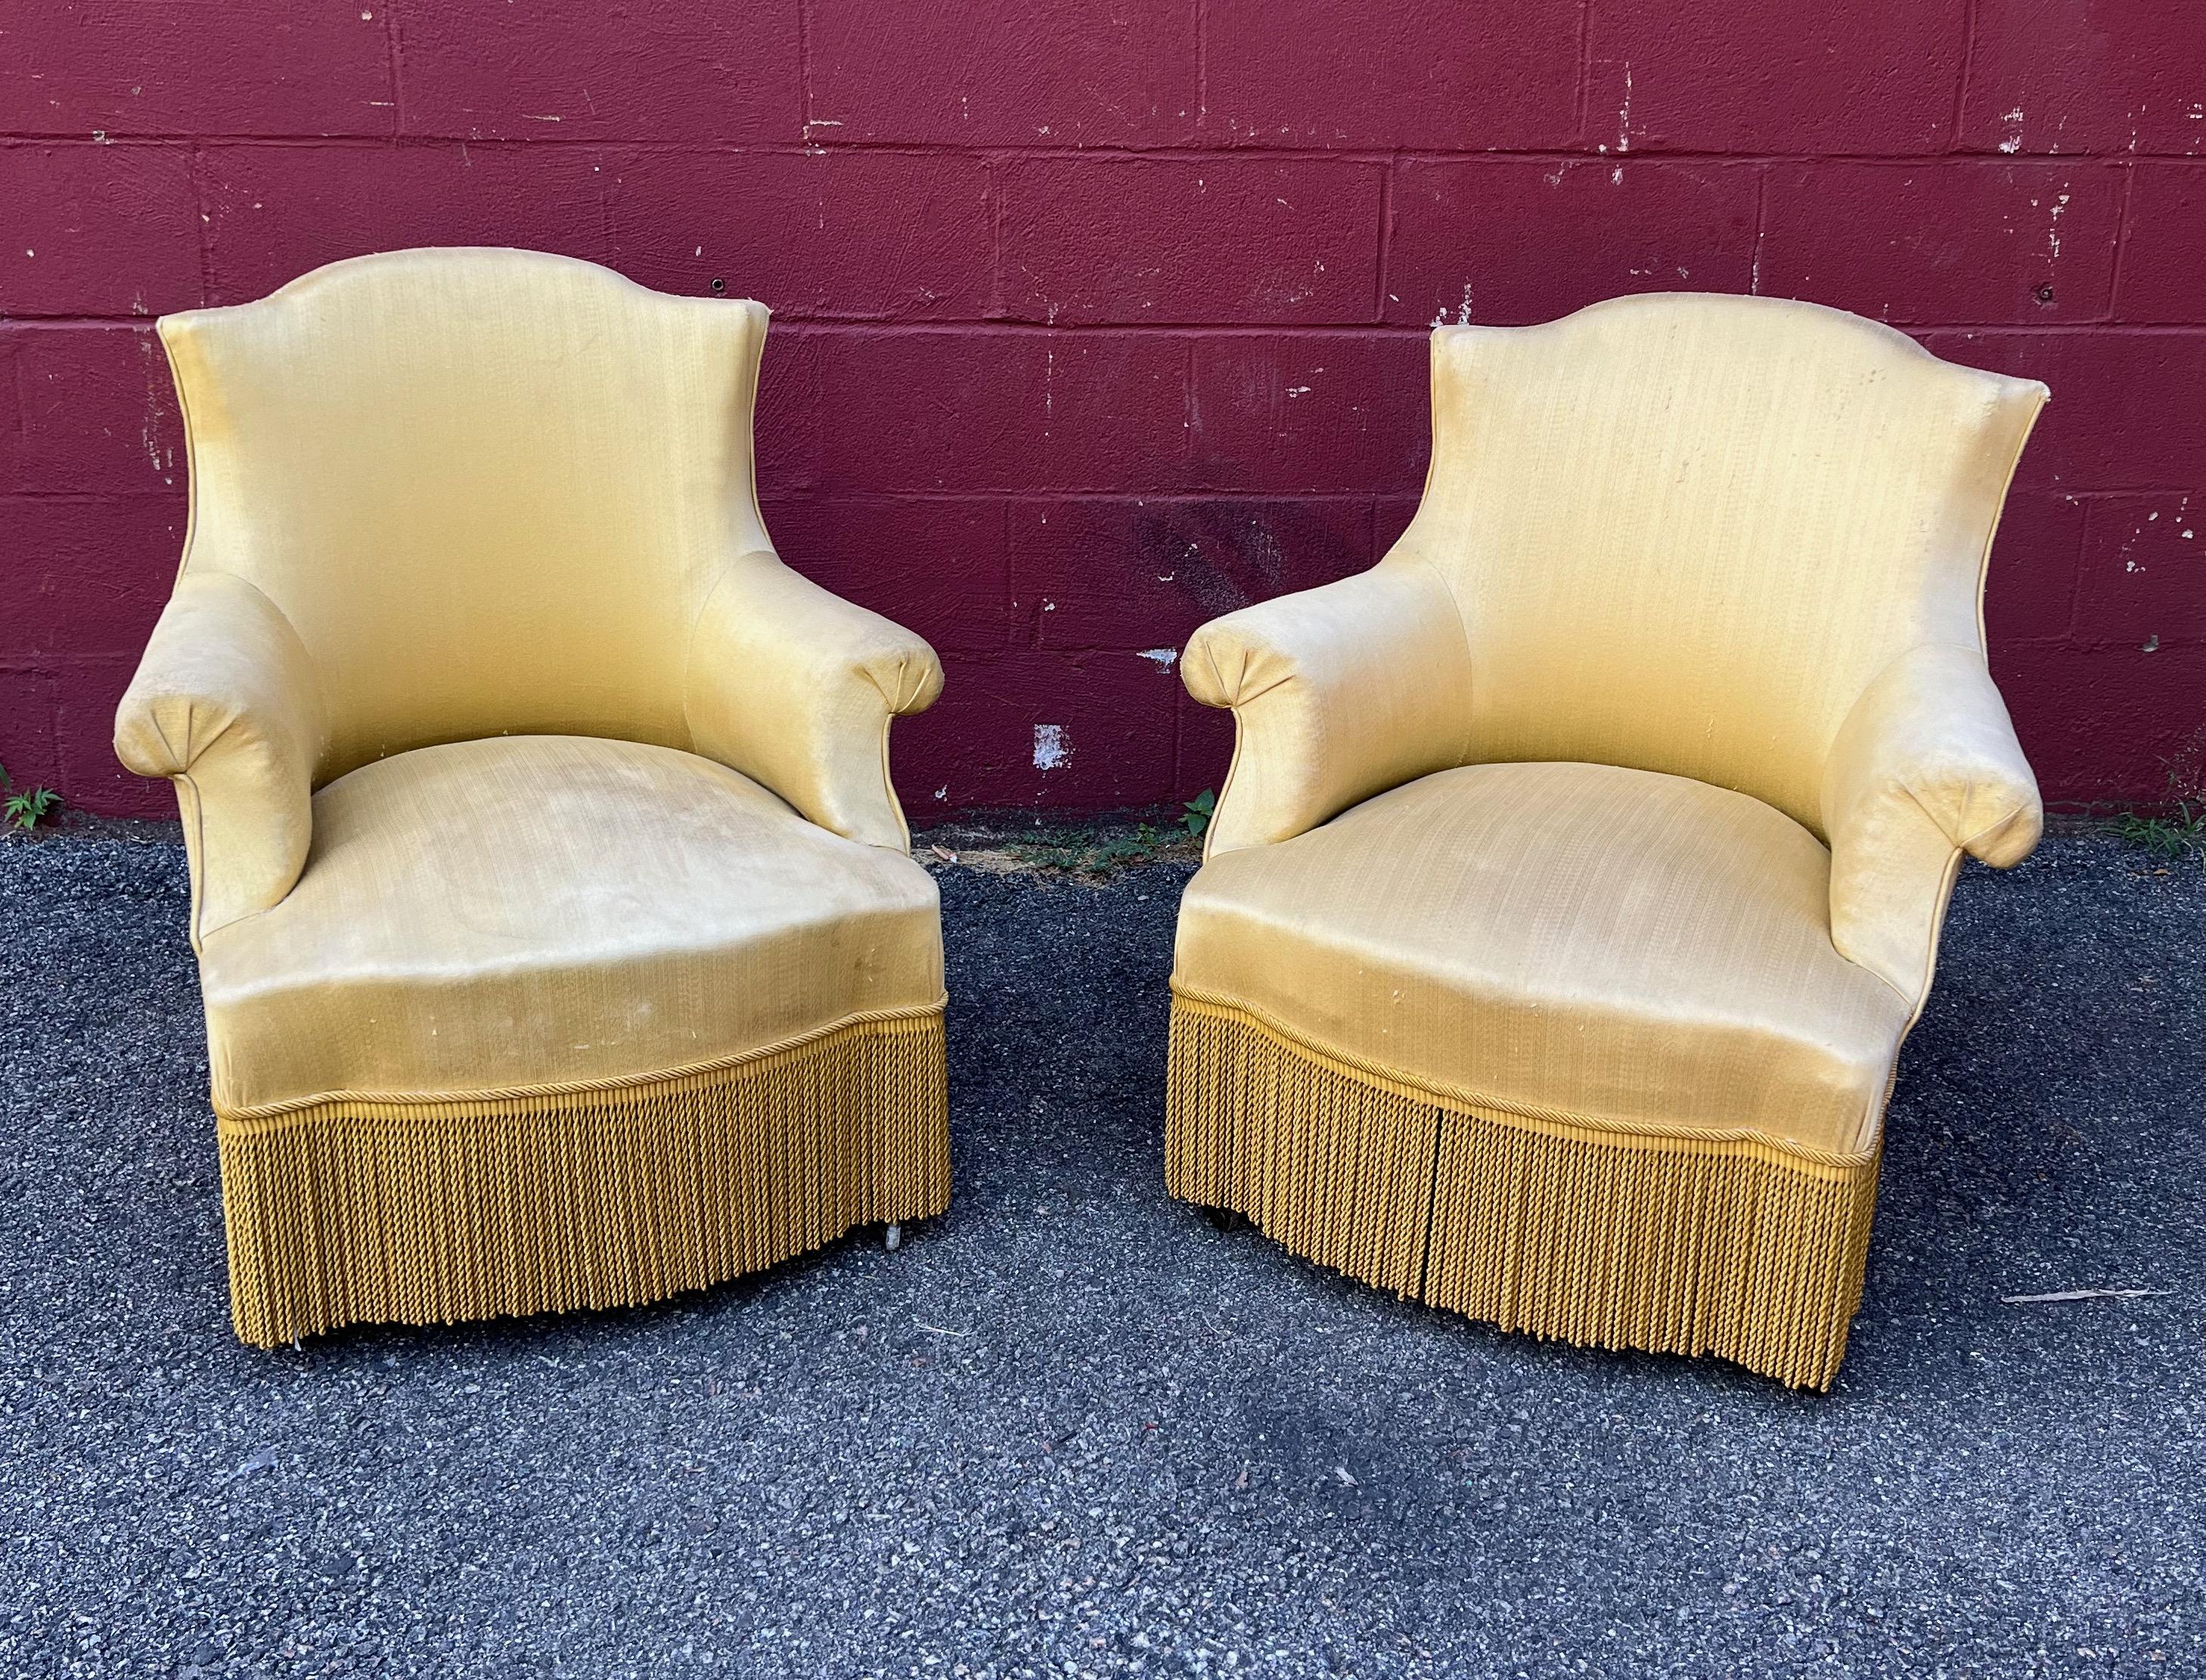 A classic pair of French Napoleon III armchairs in pale gold. Dating back to the 19th century, these authentic pieces embody classic Napoleon III style while providing an extra hint of modern luxury. Upholstered in a beautiful and subtle yellow/gold